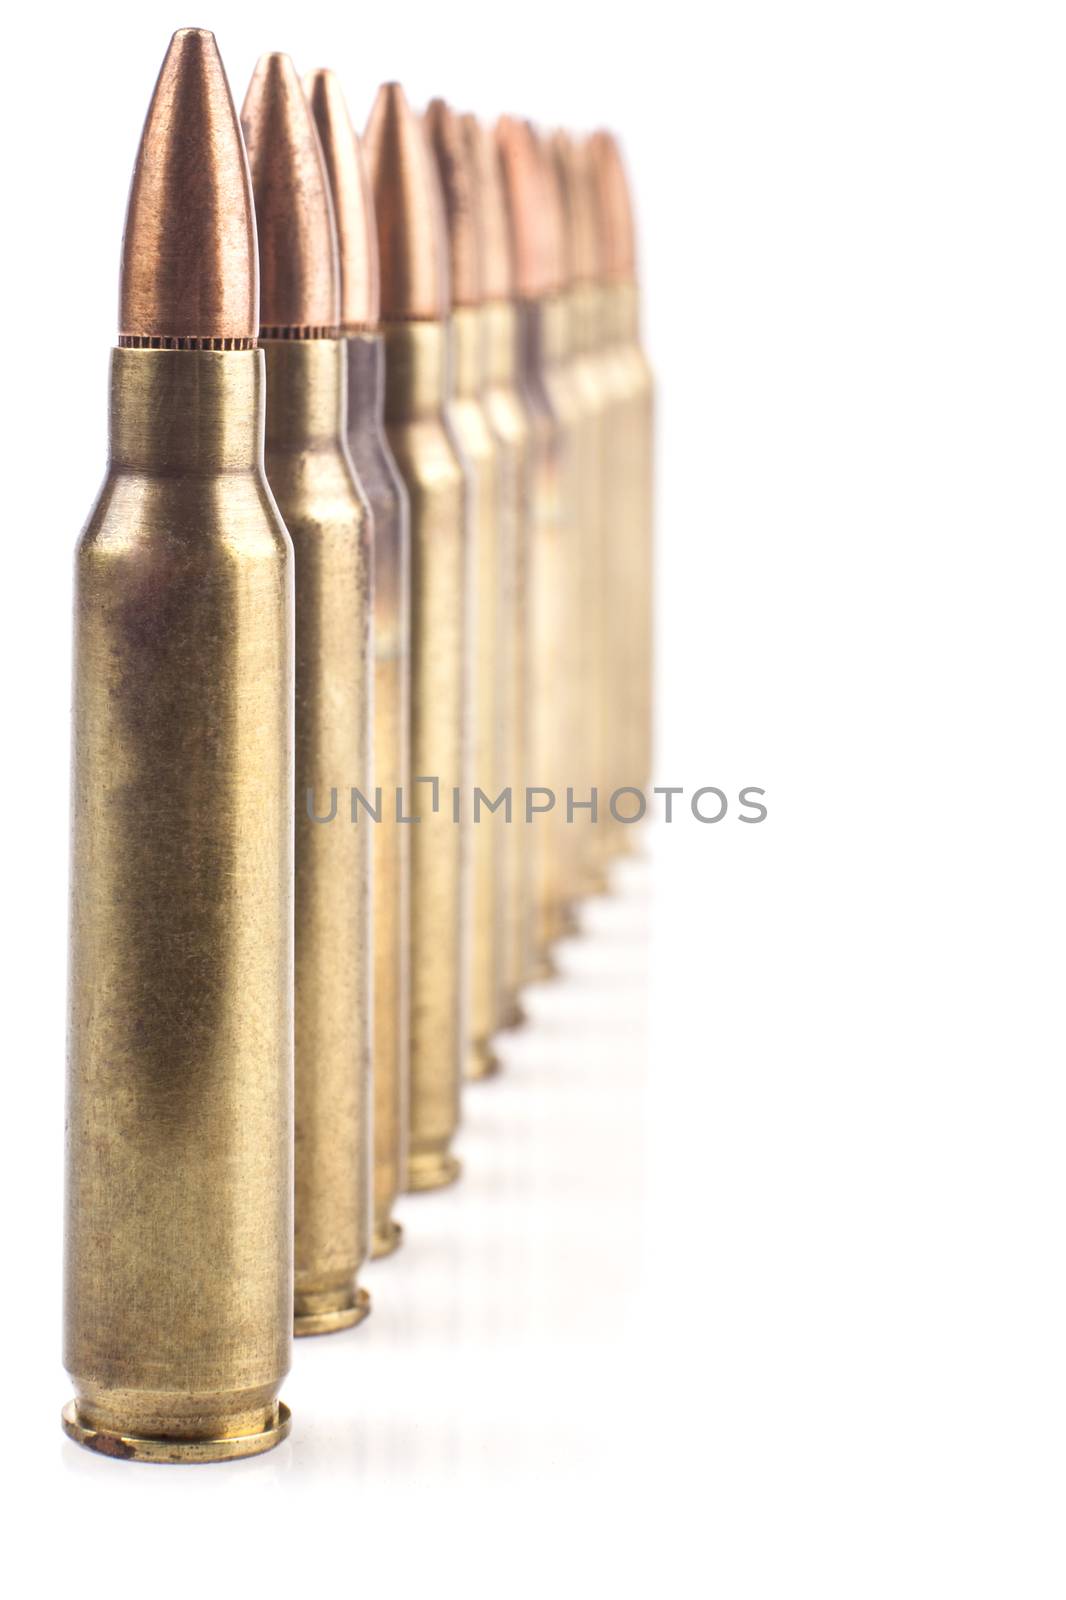 Row of Bullets by orcearo